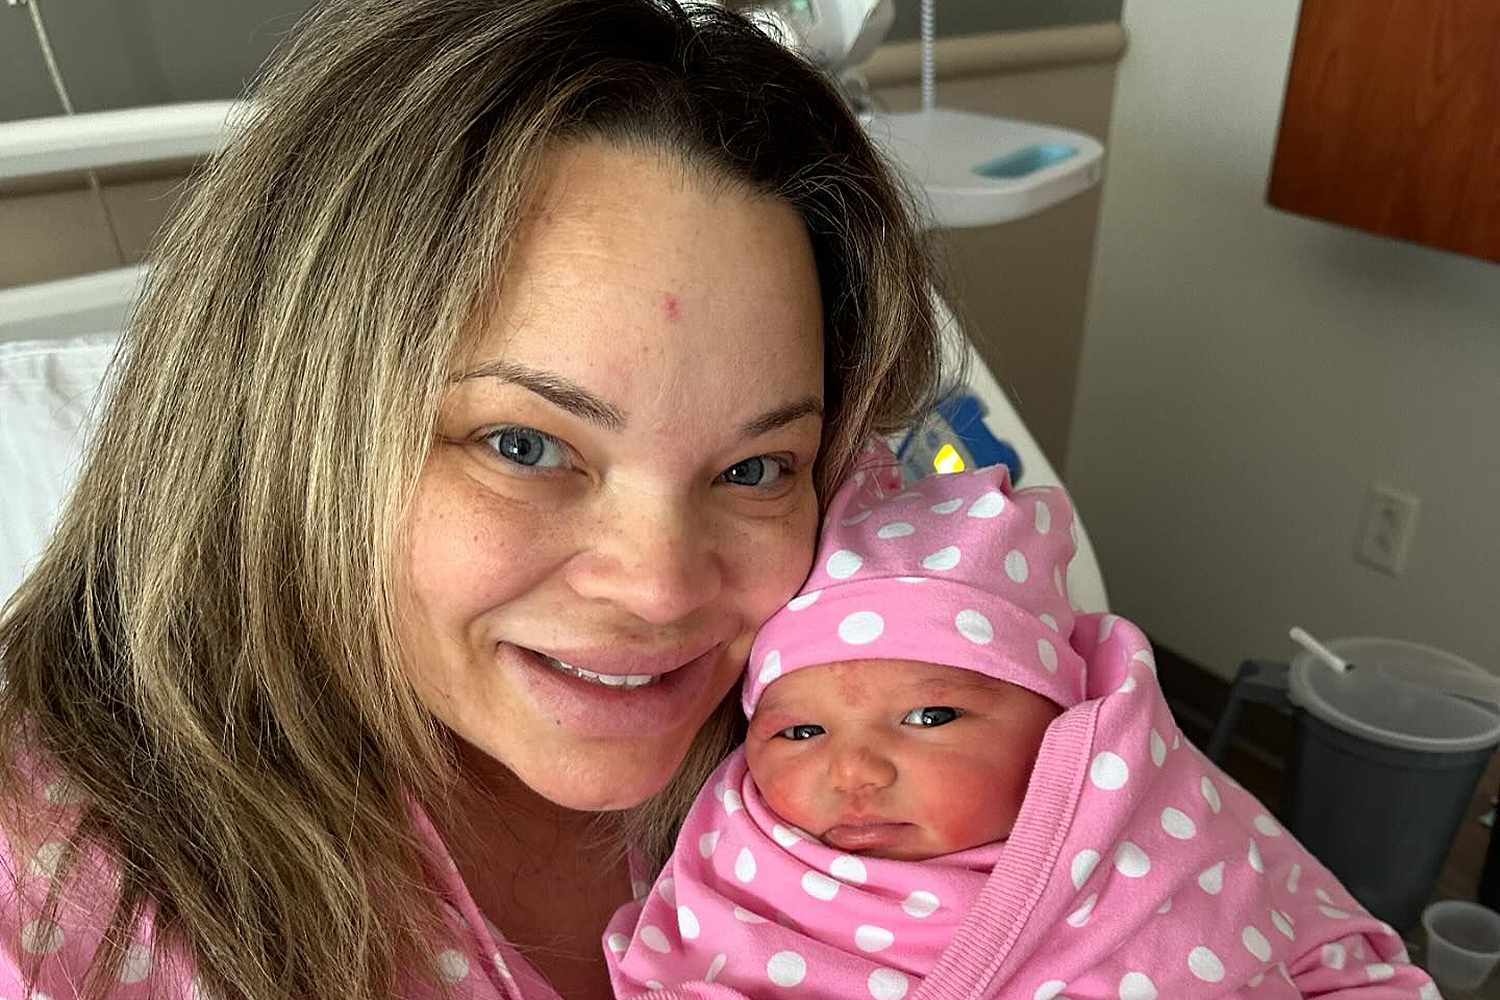 Trisha Paytas Welcomes Her Second Baby, Daughter Elvis, with Husband Moses Hacmon: 'Precious'